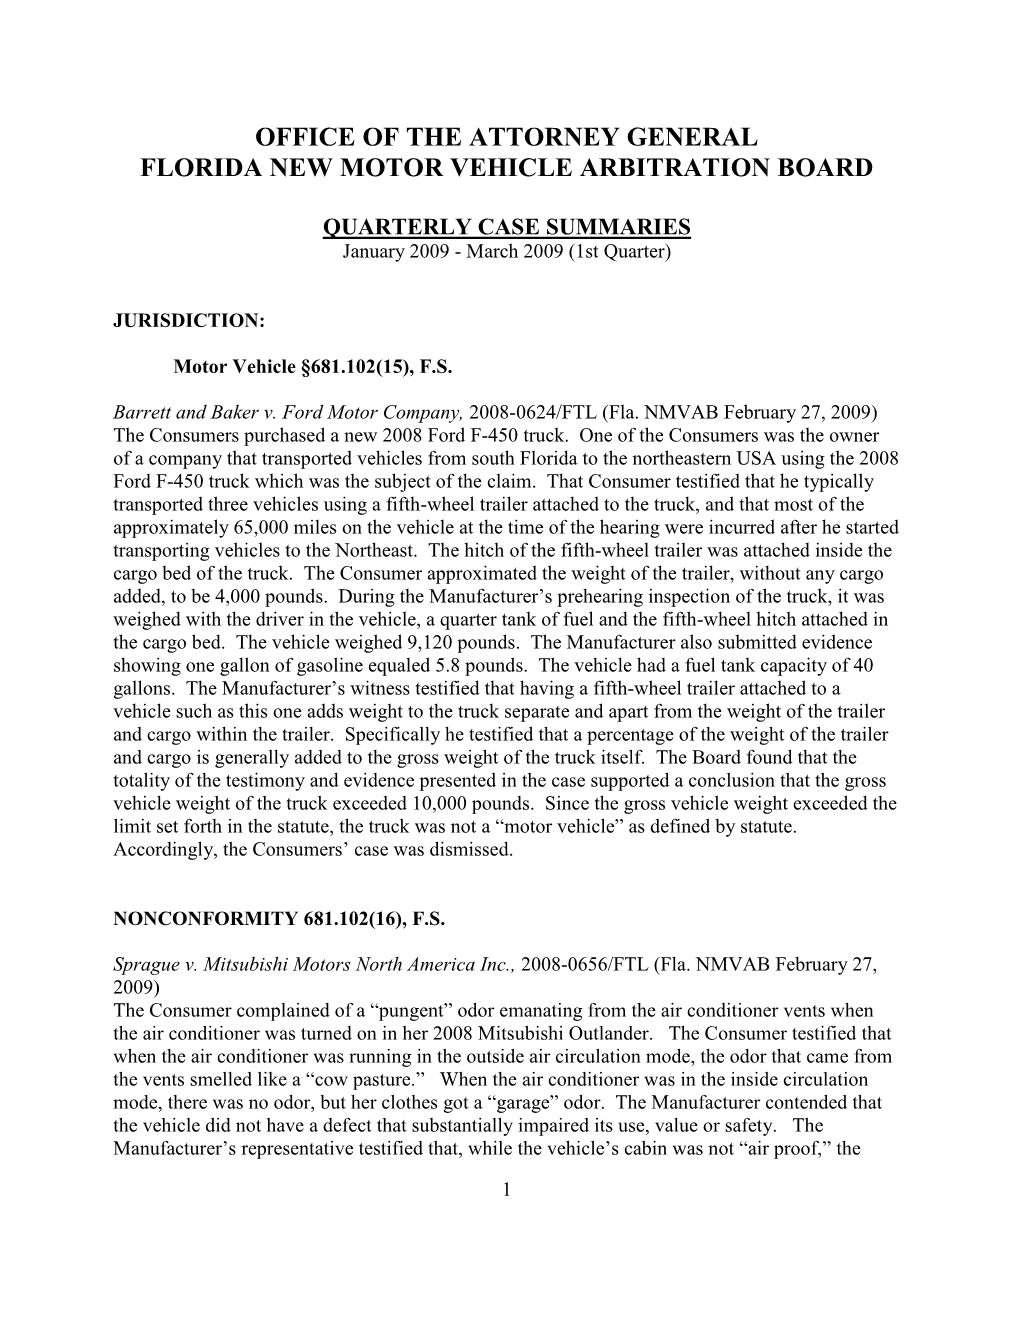 Office of the Attorney General Florida New Motor Vehicle Arbitration Board